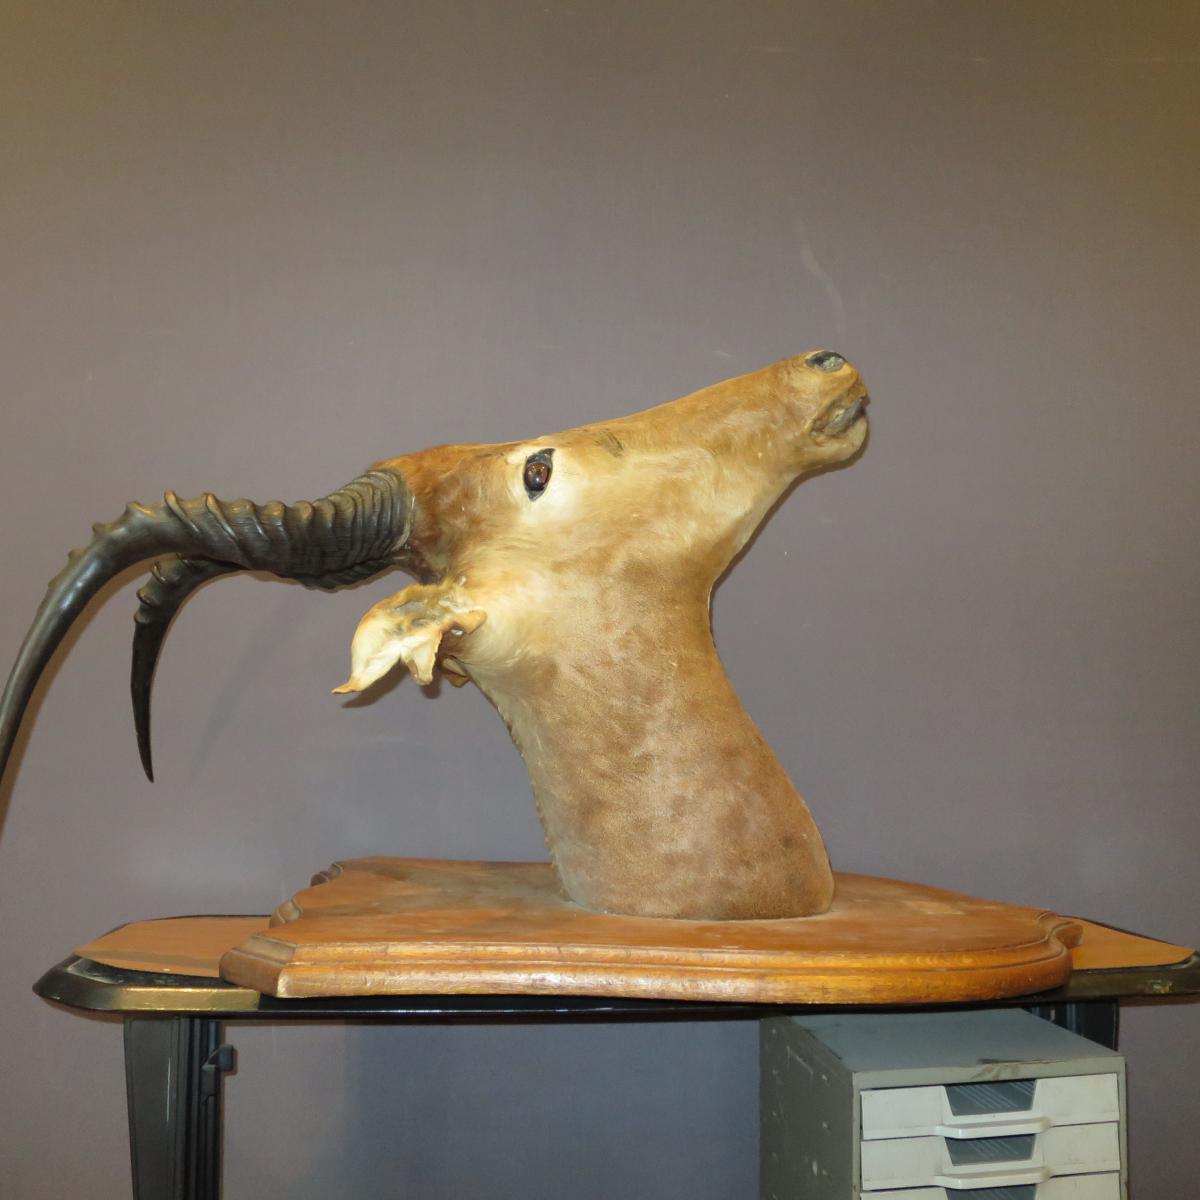 Antelope Puku Kobus Head Naturalized In Trophy Hunting Taxidermy Cabinet Of Curiosity-photo-4